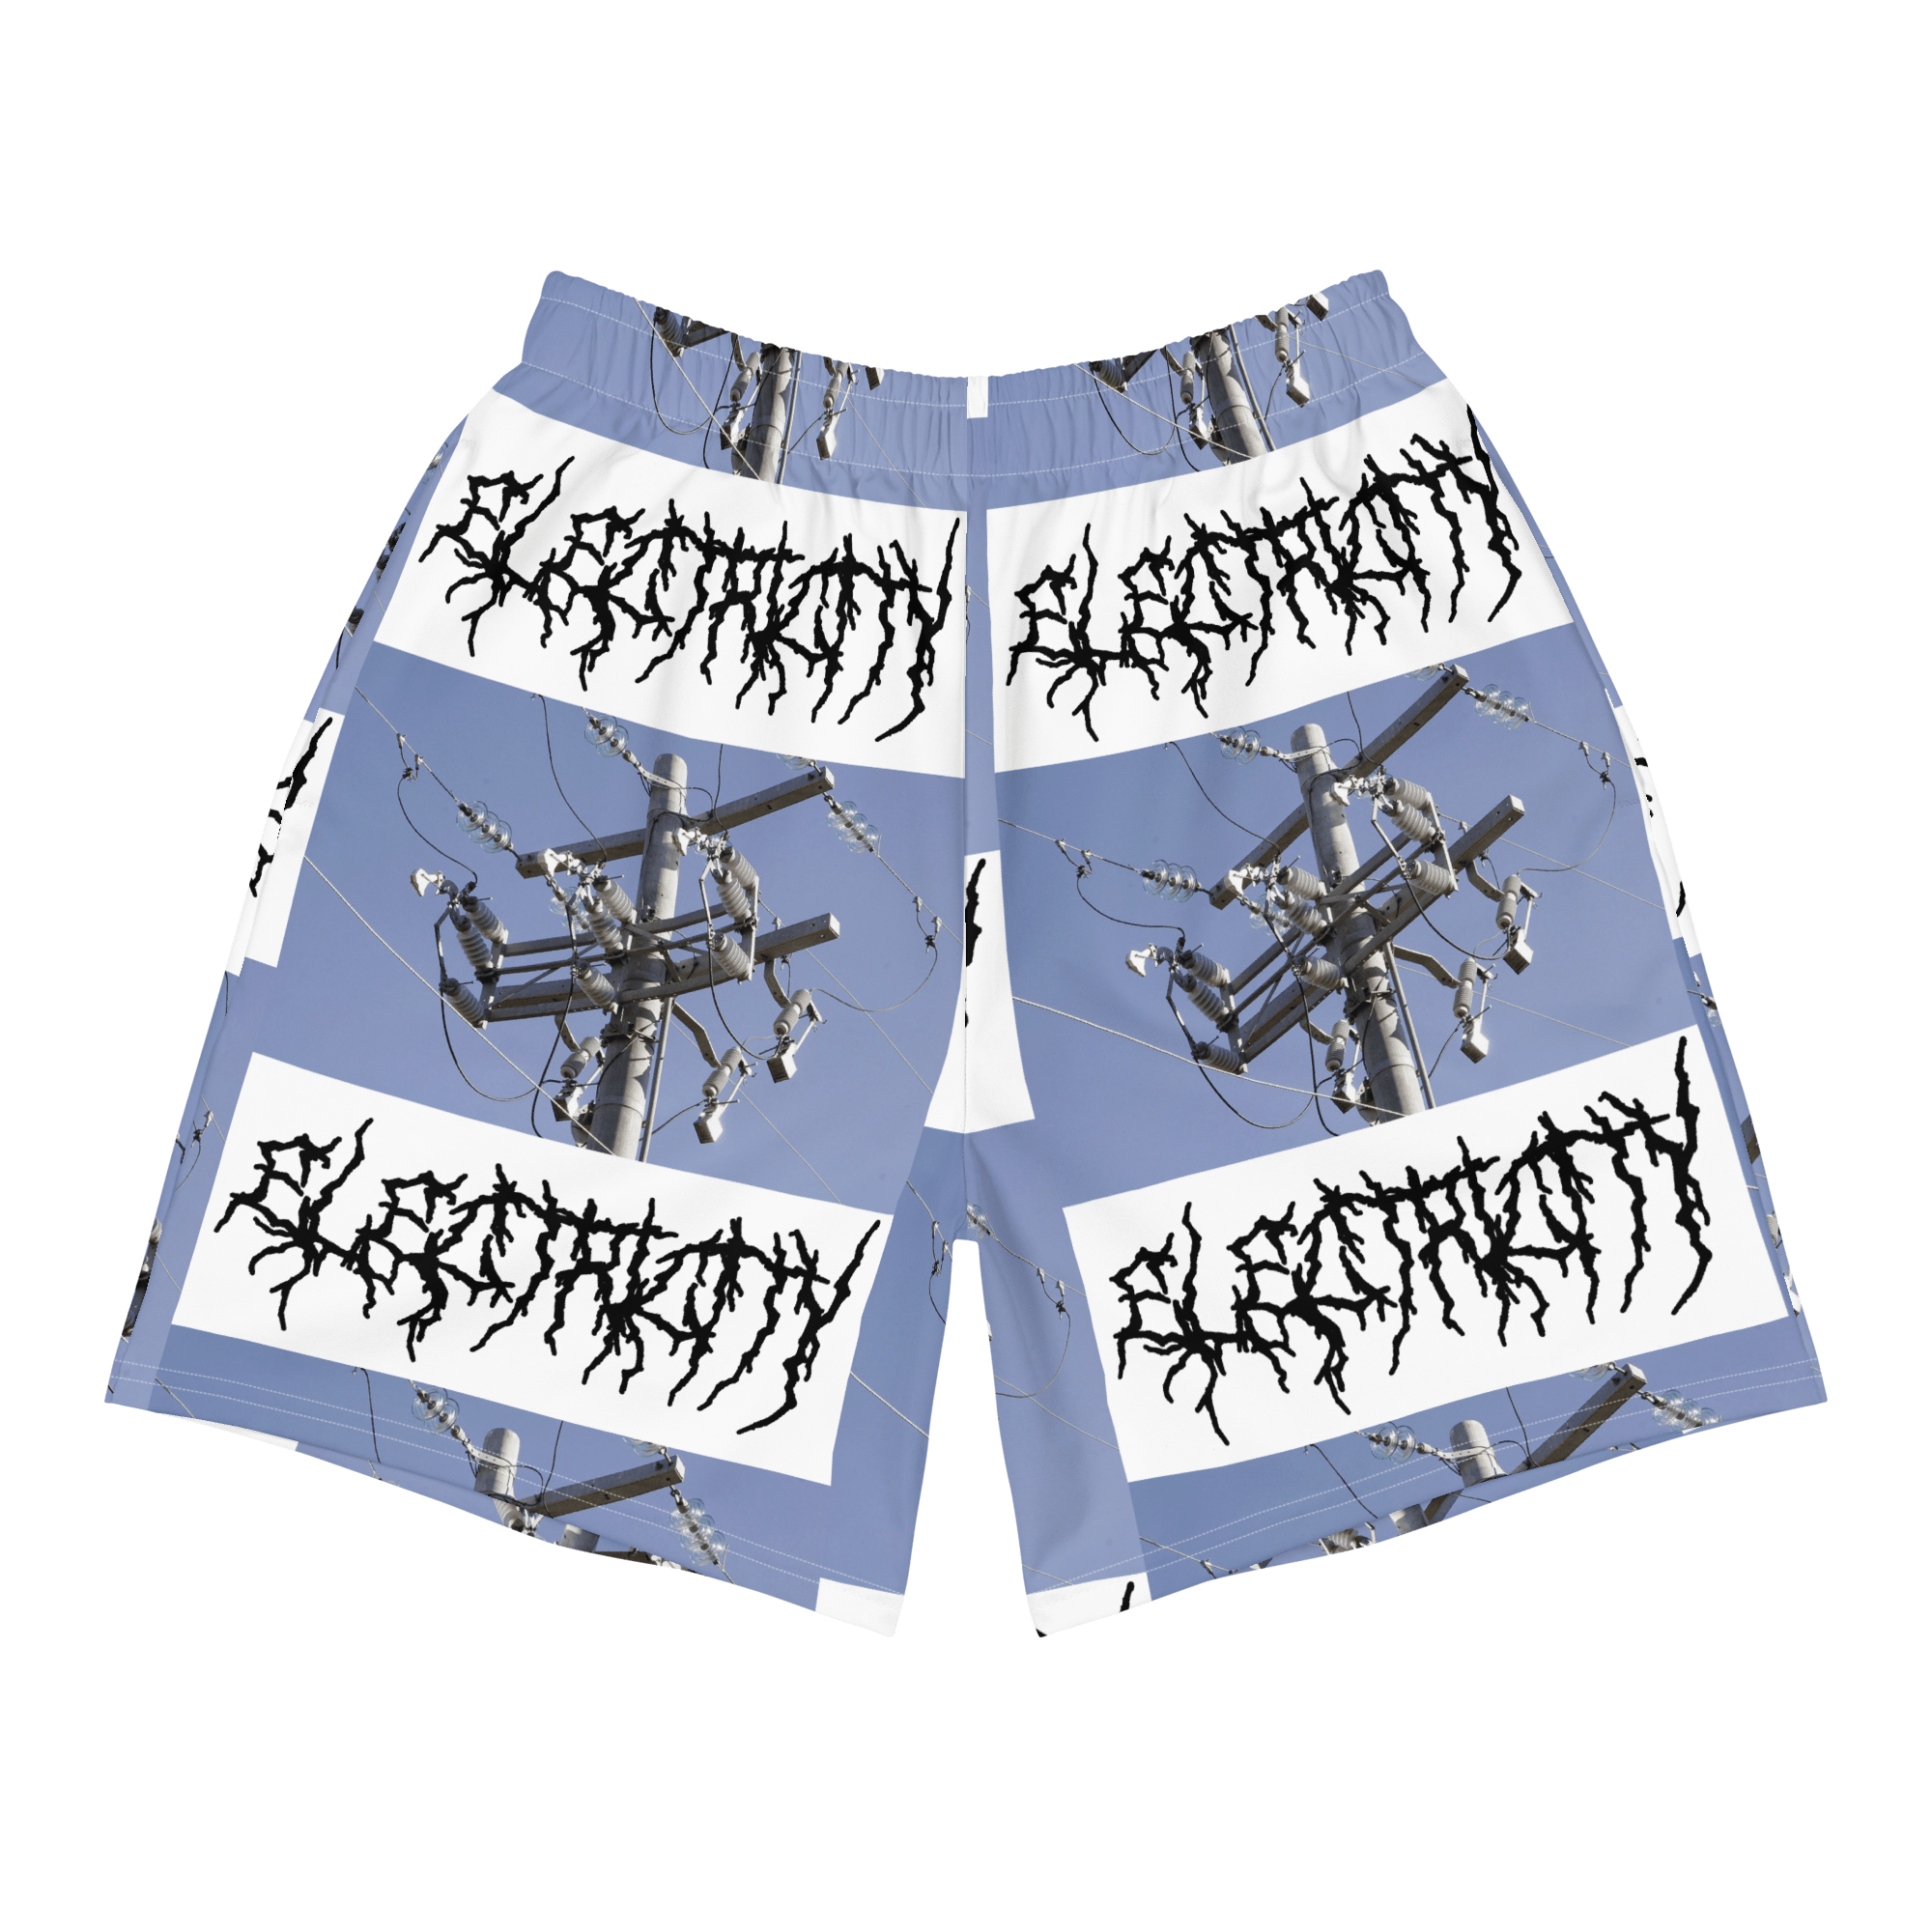 Red Demon Shorts – Soloflow Brand